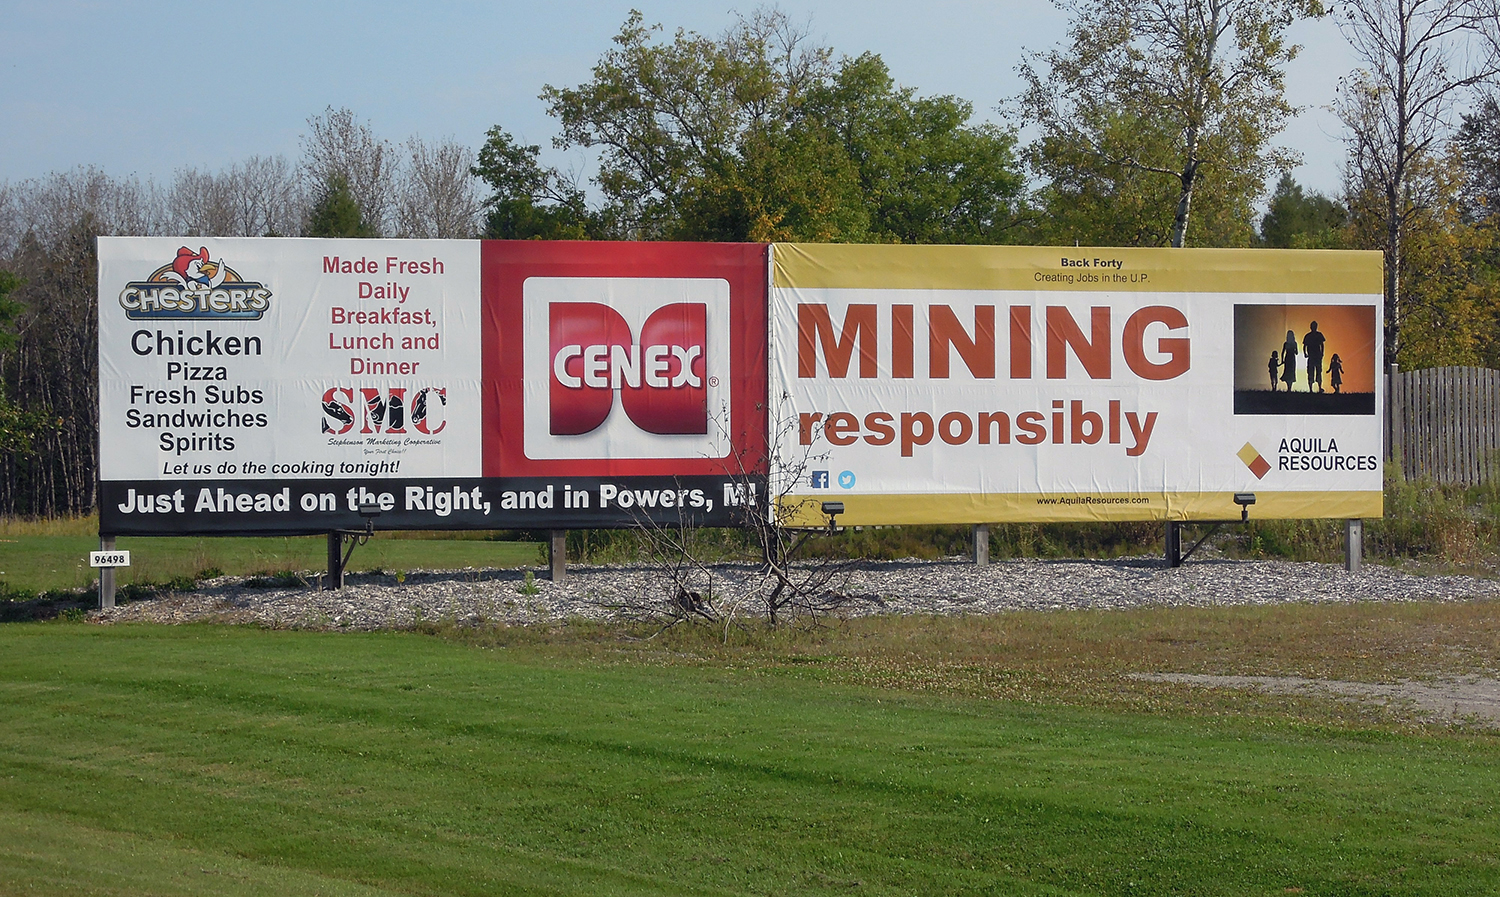 Billboard supporting Back Forty mine